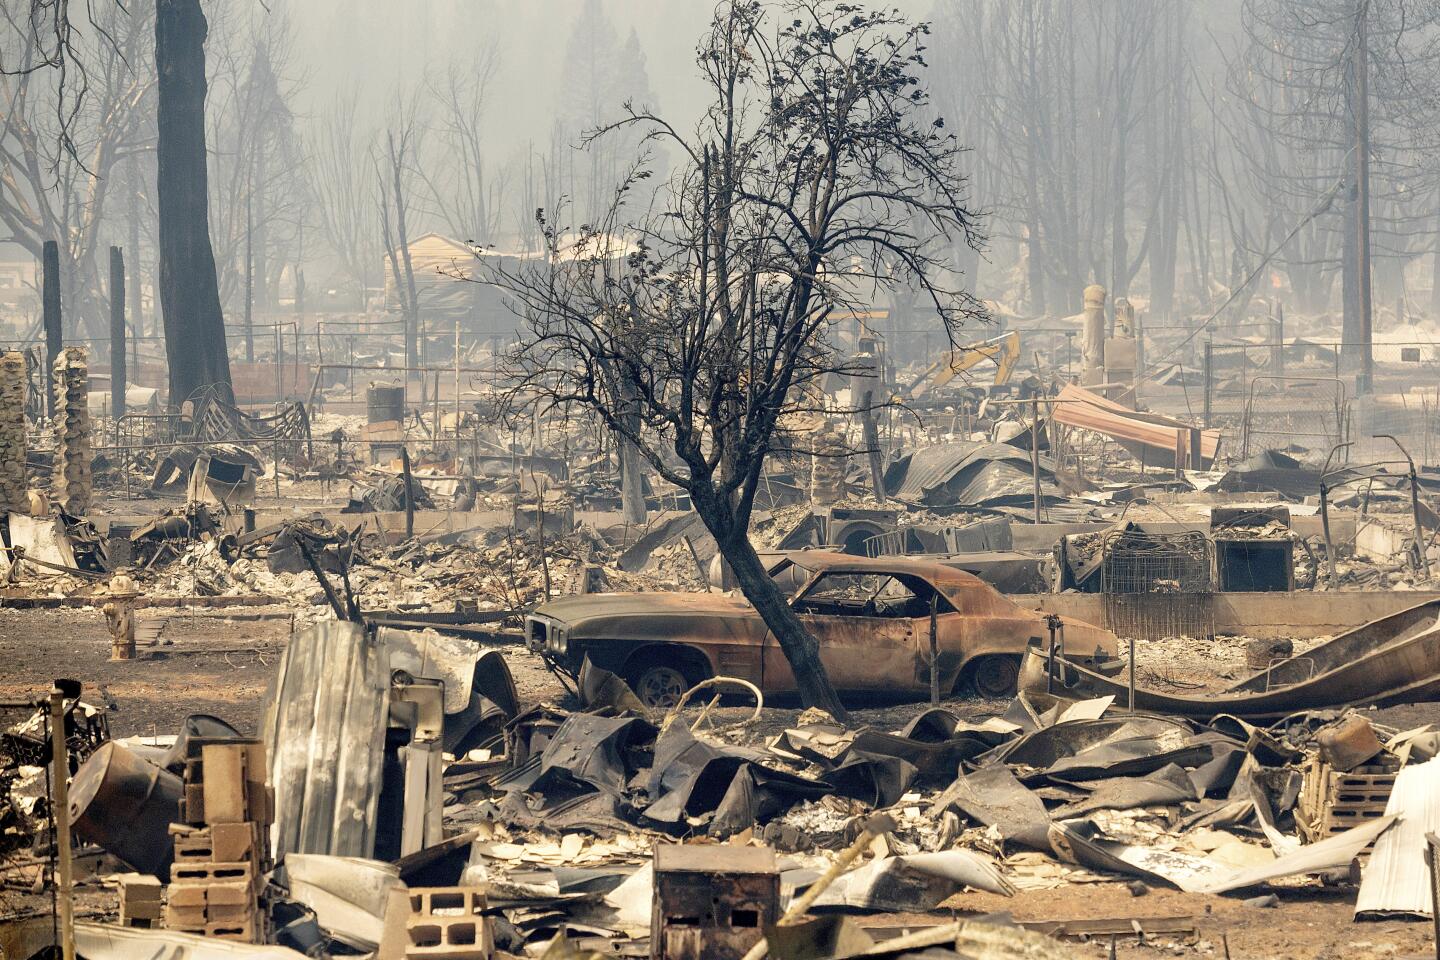 Homes and cars destroyed by the Dixie Fire line central Greenville on Aug. 5, 2021.